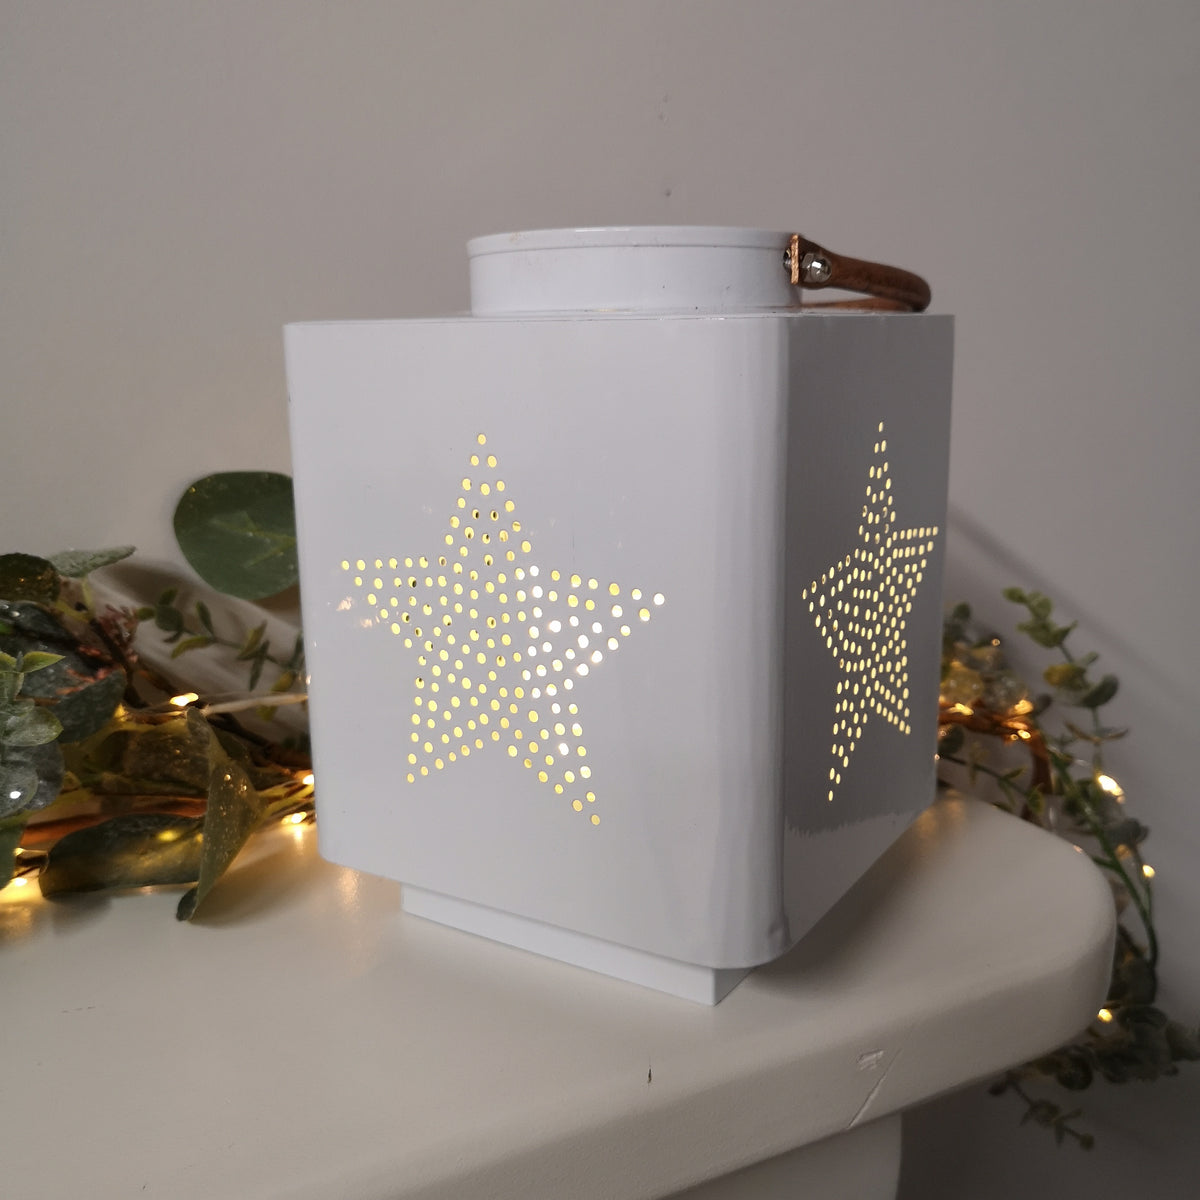 140 x 185M White Metal Star Design Lantern With Glass Candle Pot and Copper Handle